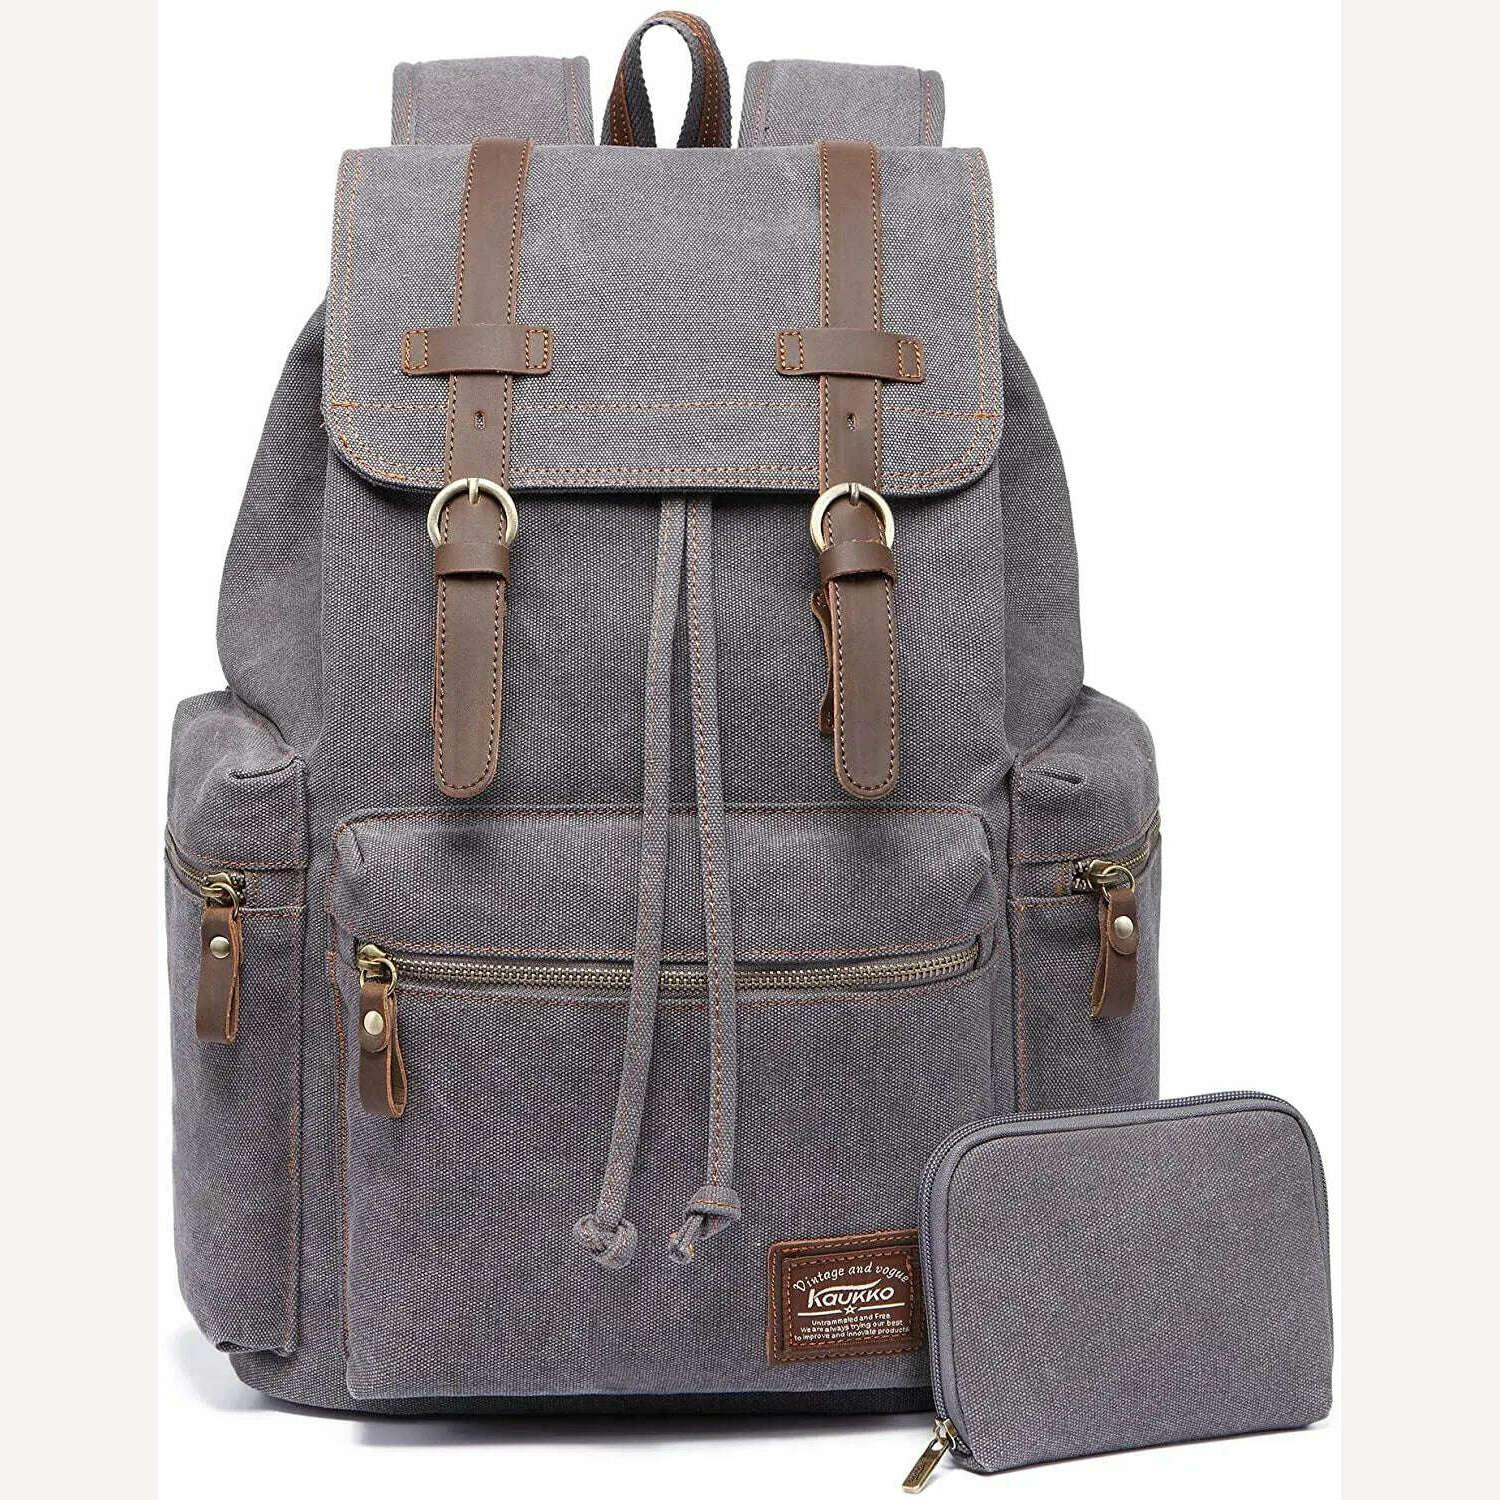 KIMLUD, vintage canvas Backpacks Men And Women Bags Travel Students Casual For Hiking Travel Camping Backpack Mochila Masculina, gray set, KIMLUD Womens Clothes